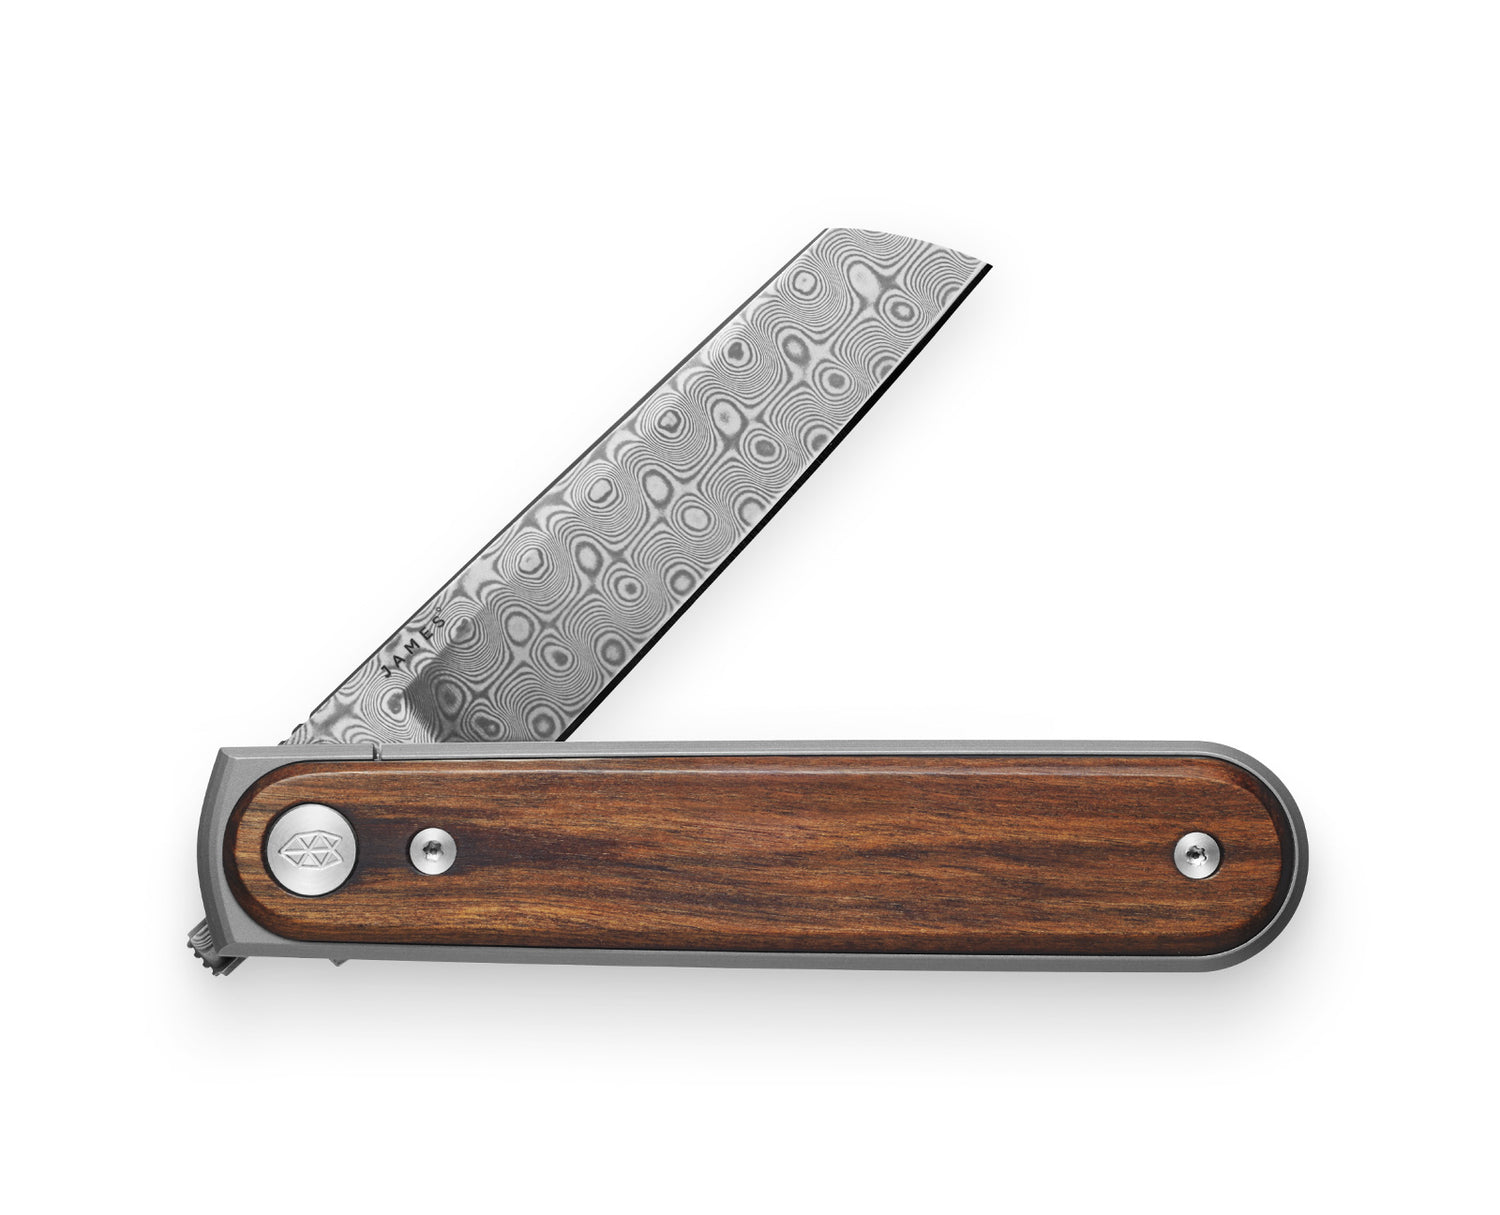 The Duval knife with rosewood handle and damasteel blade.